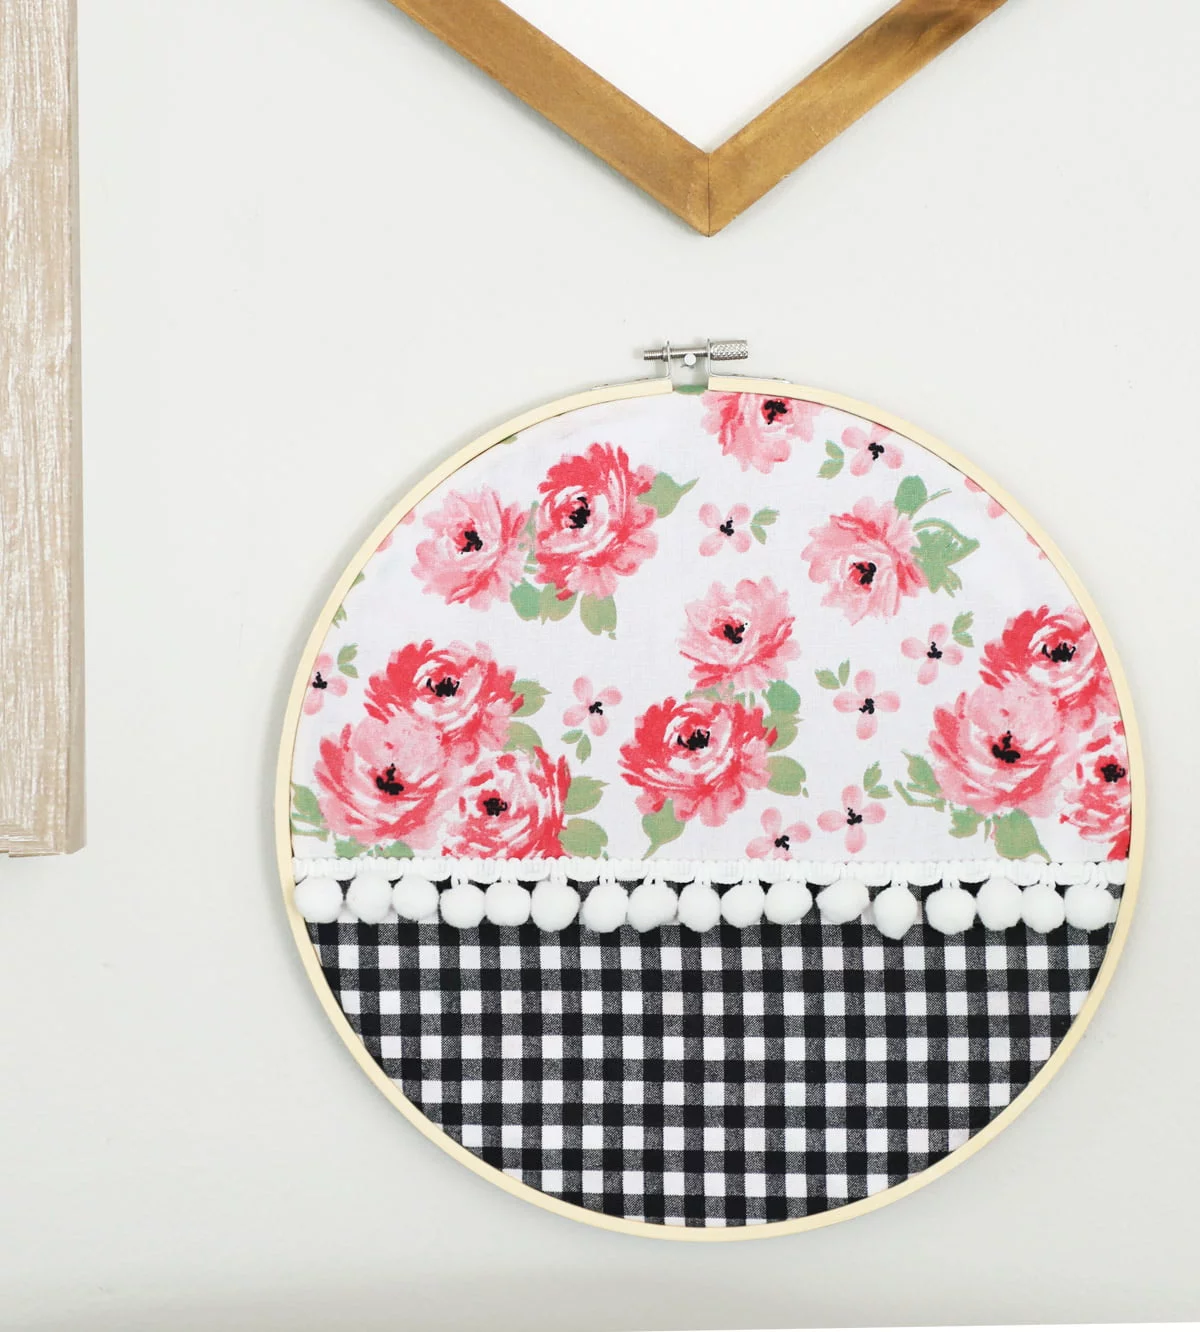 No Sew Embroidery Hoop Art